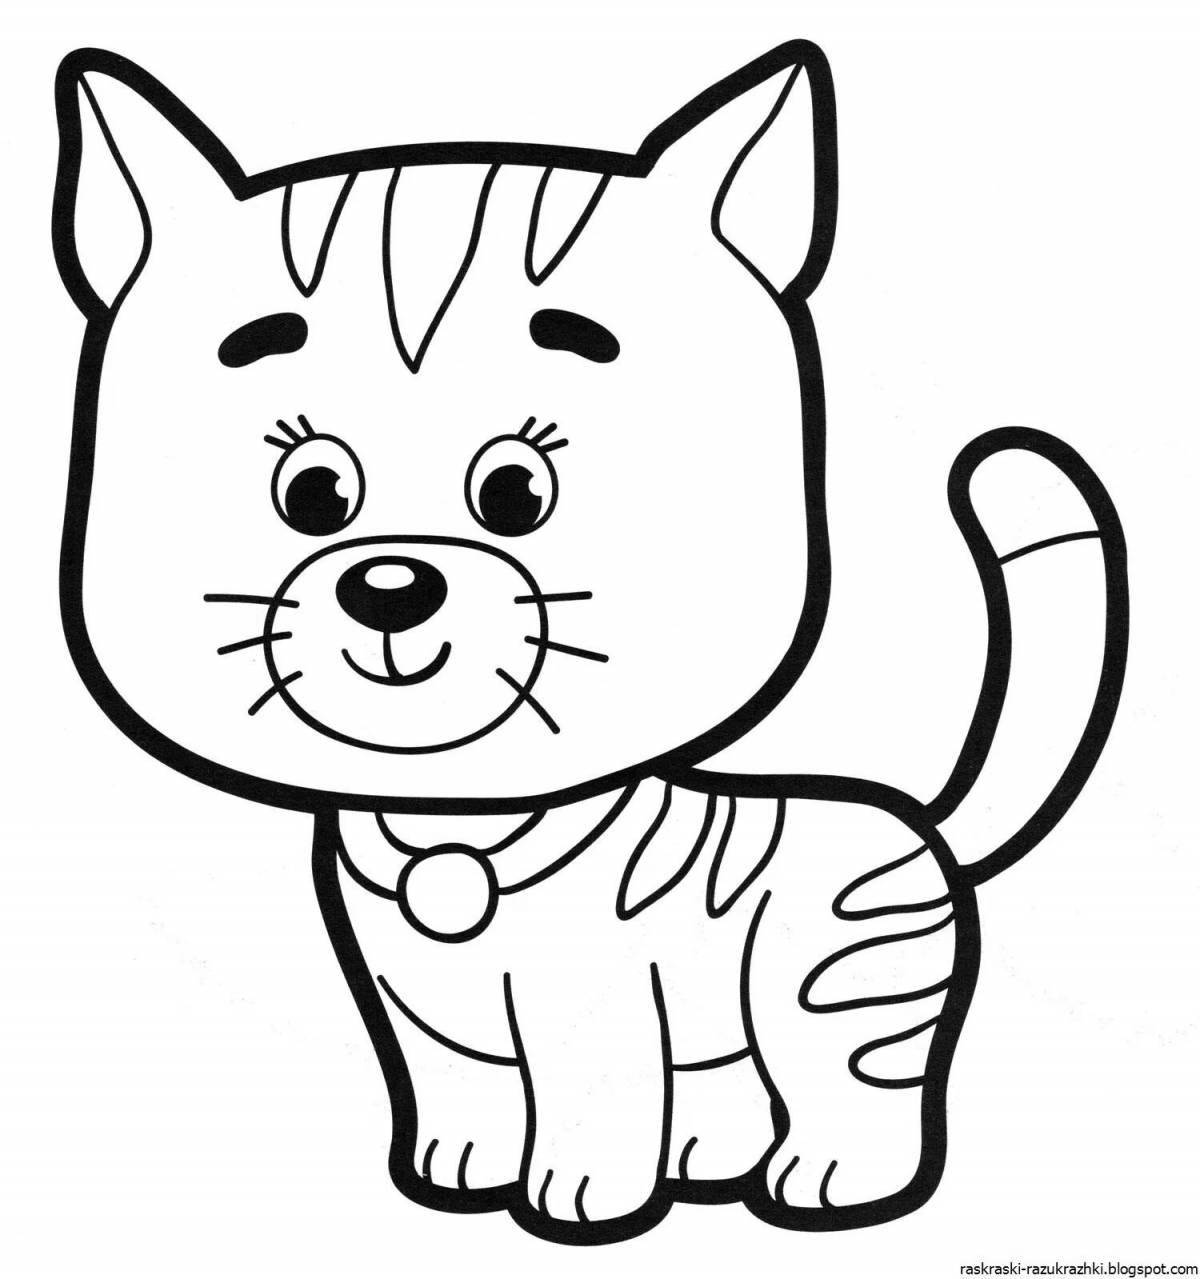 Amazing cat coloring page for kids